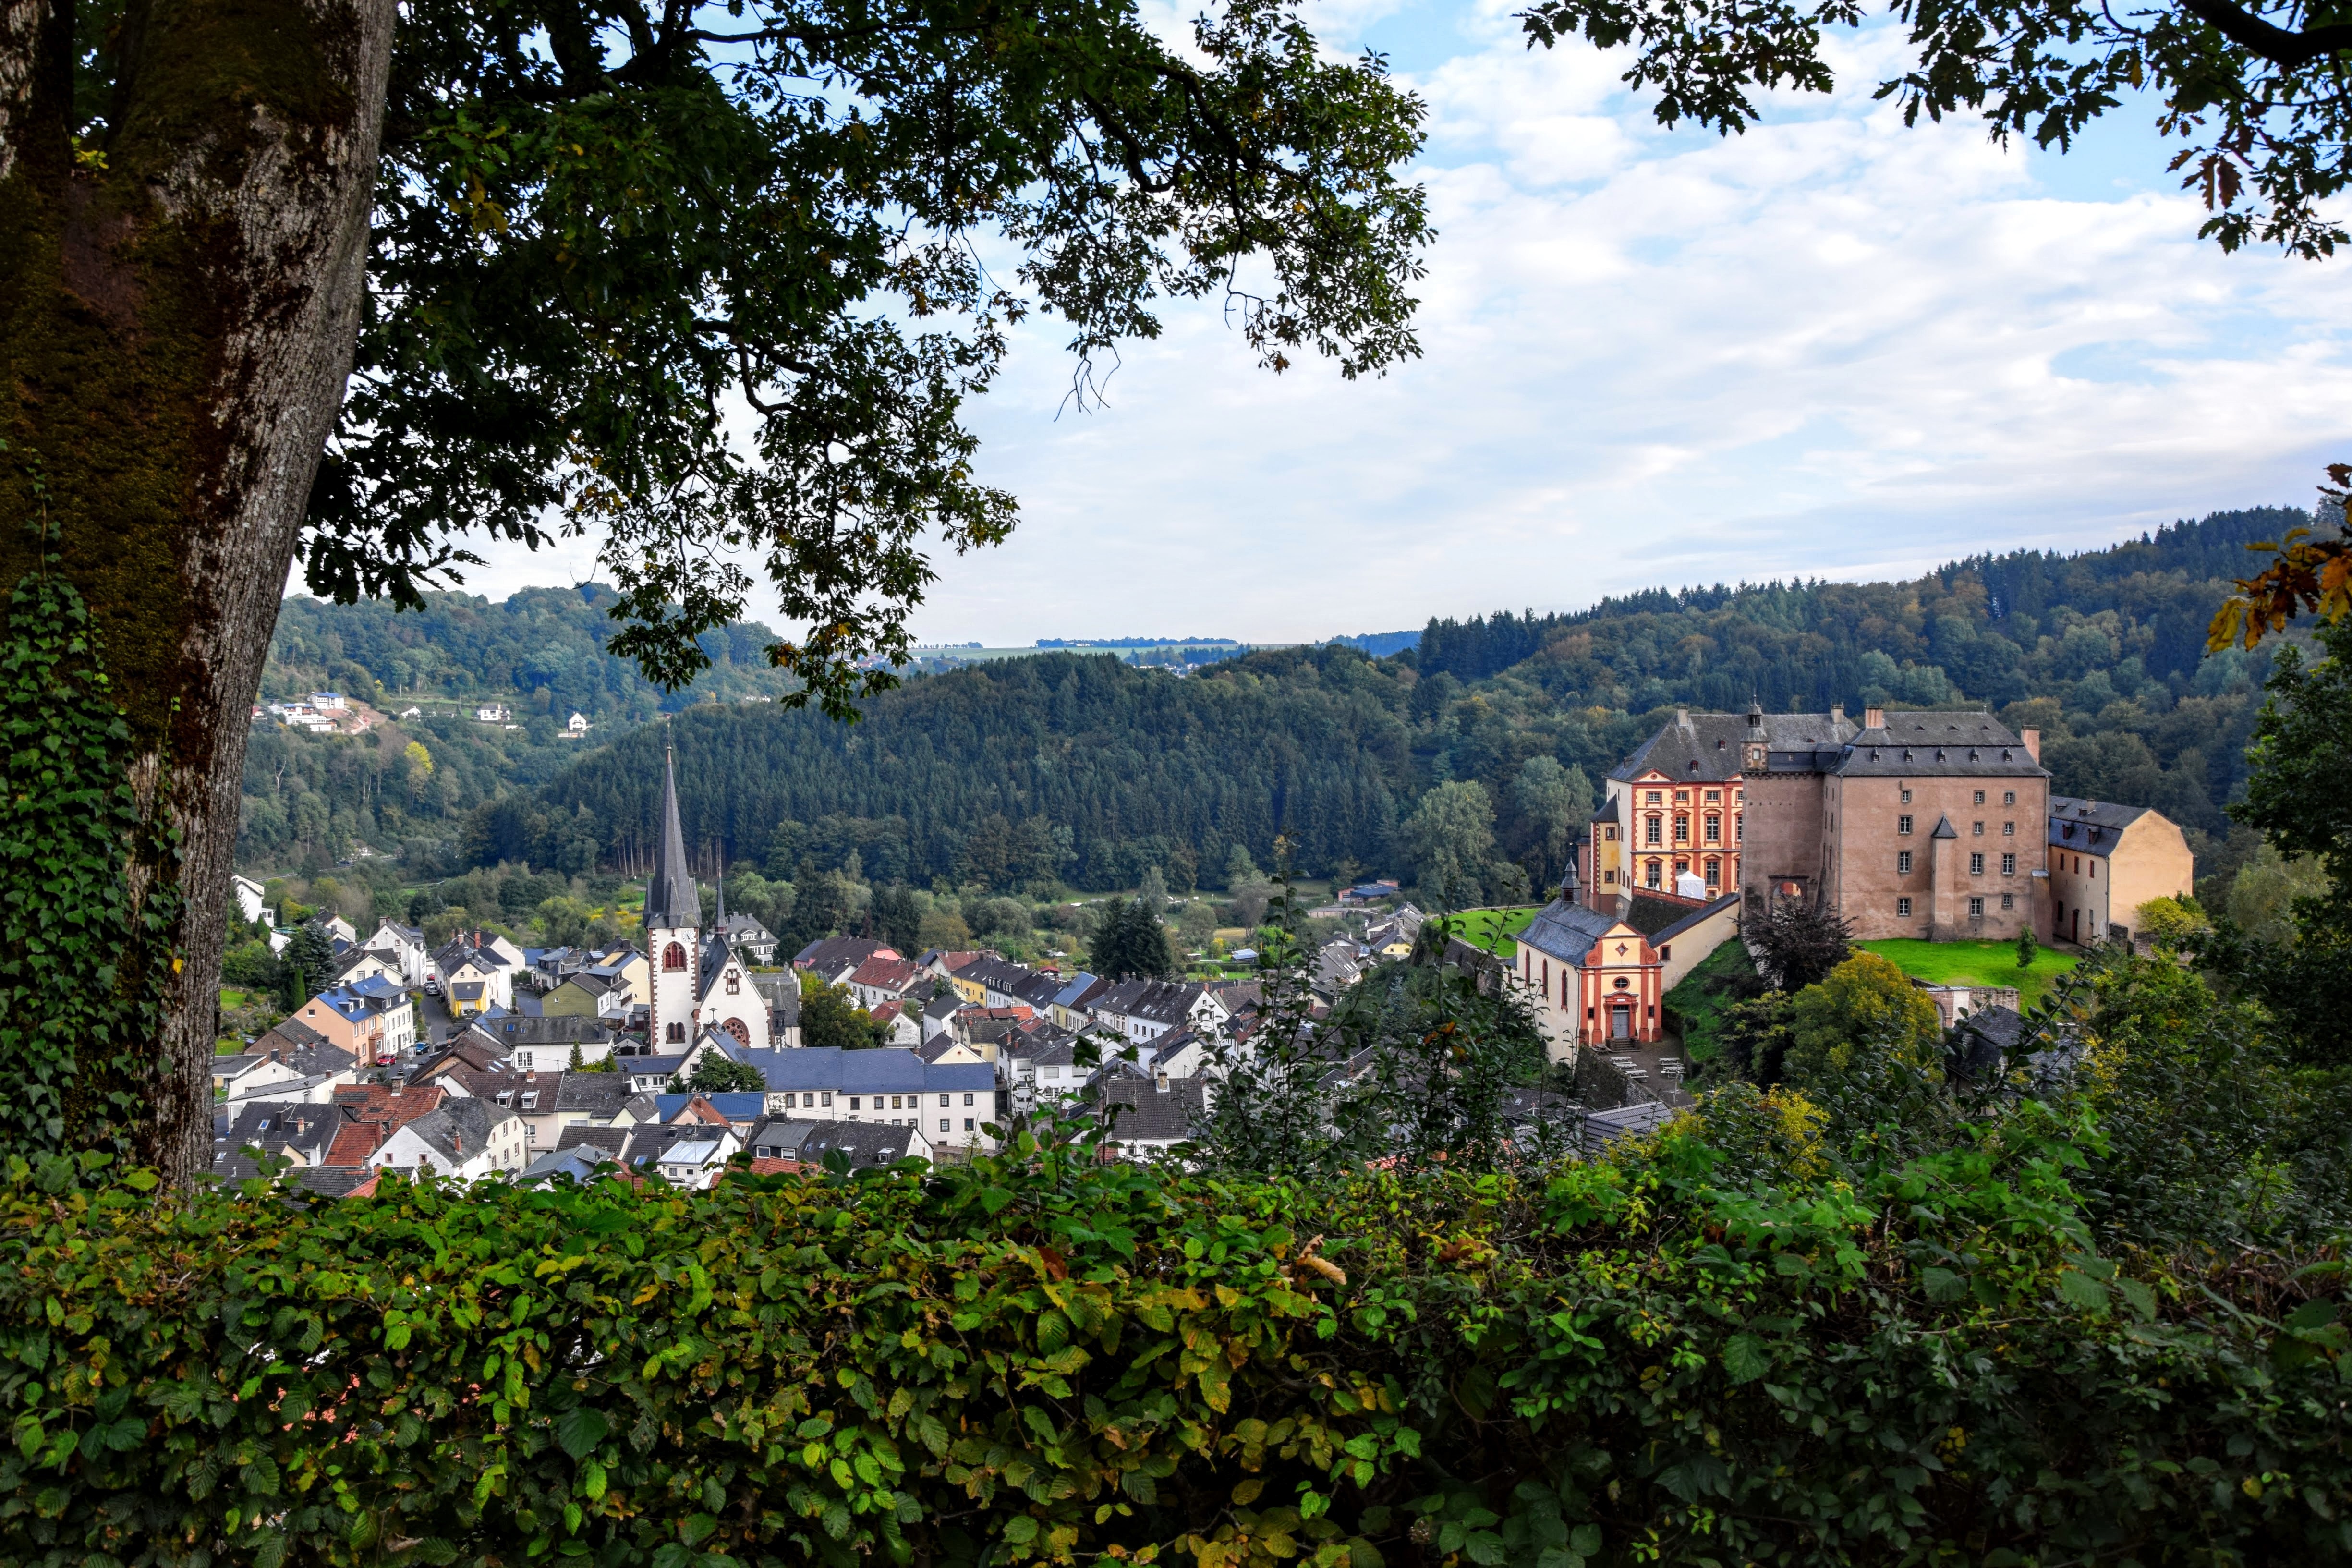 trees, germany, cities, architecture, building, malberg